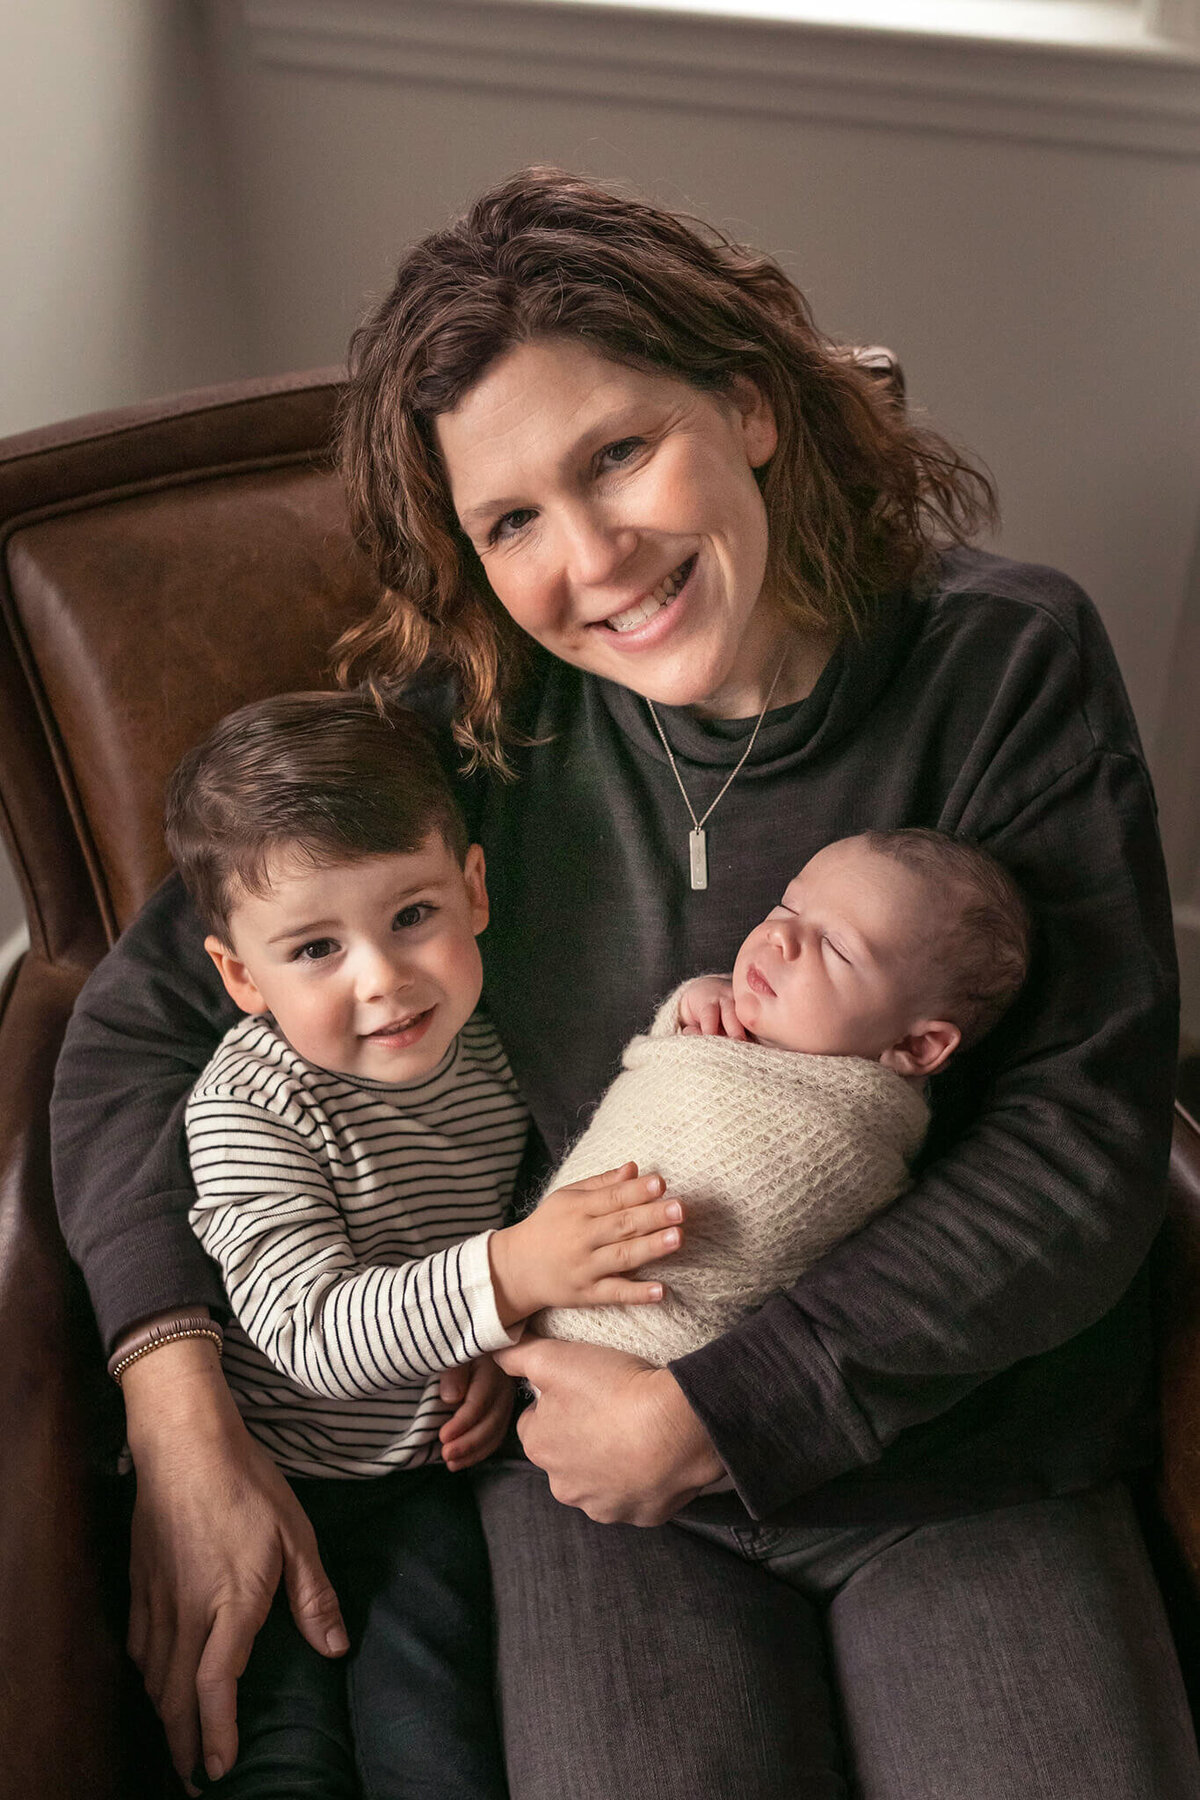 NJ Baby photographer captures mom holding her two sons close